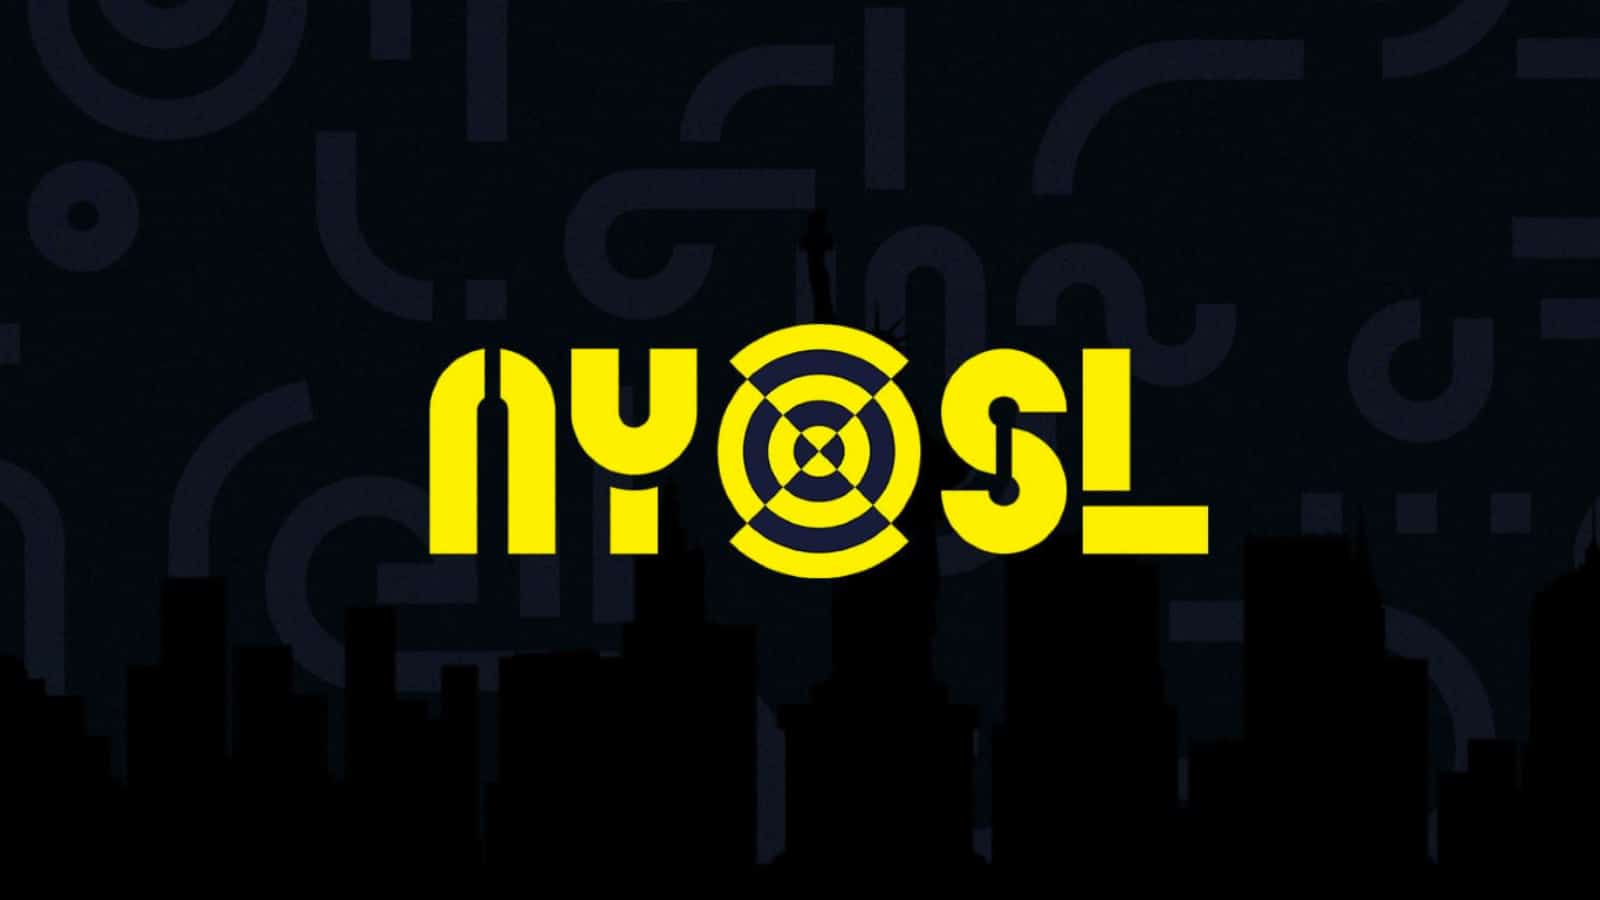 New York SUbliners logo Call of Duty League